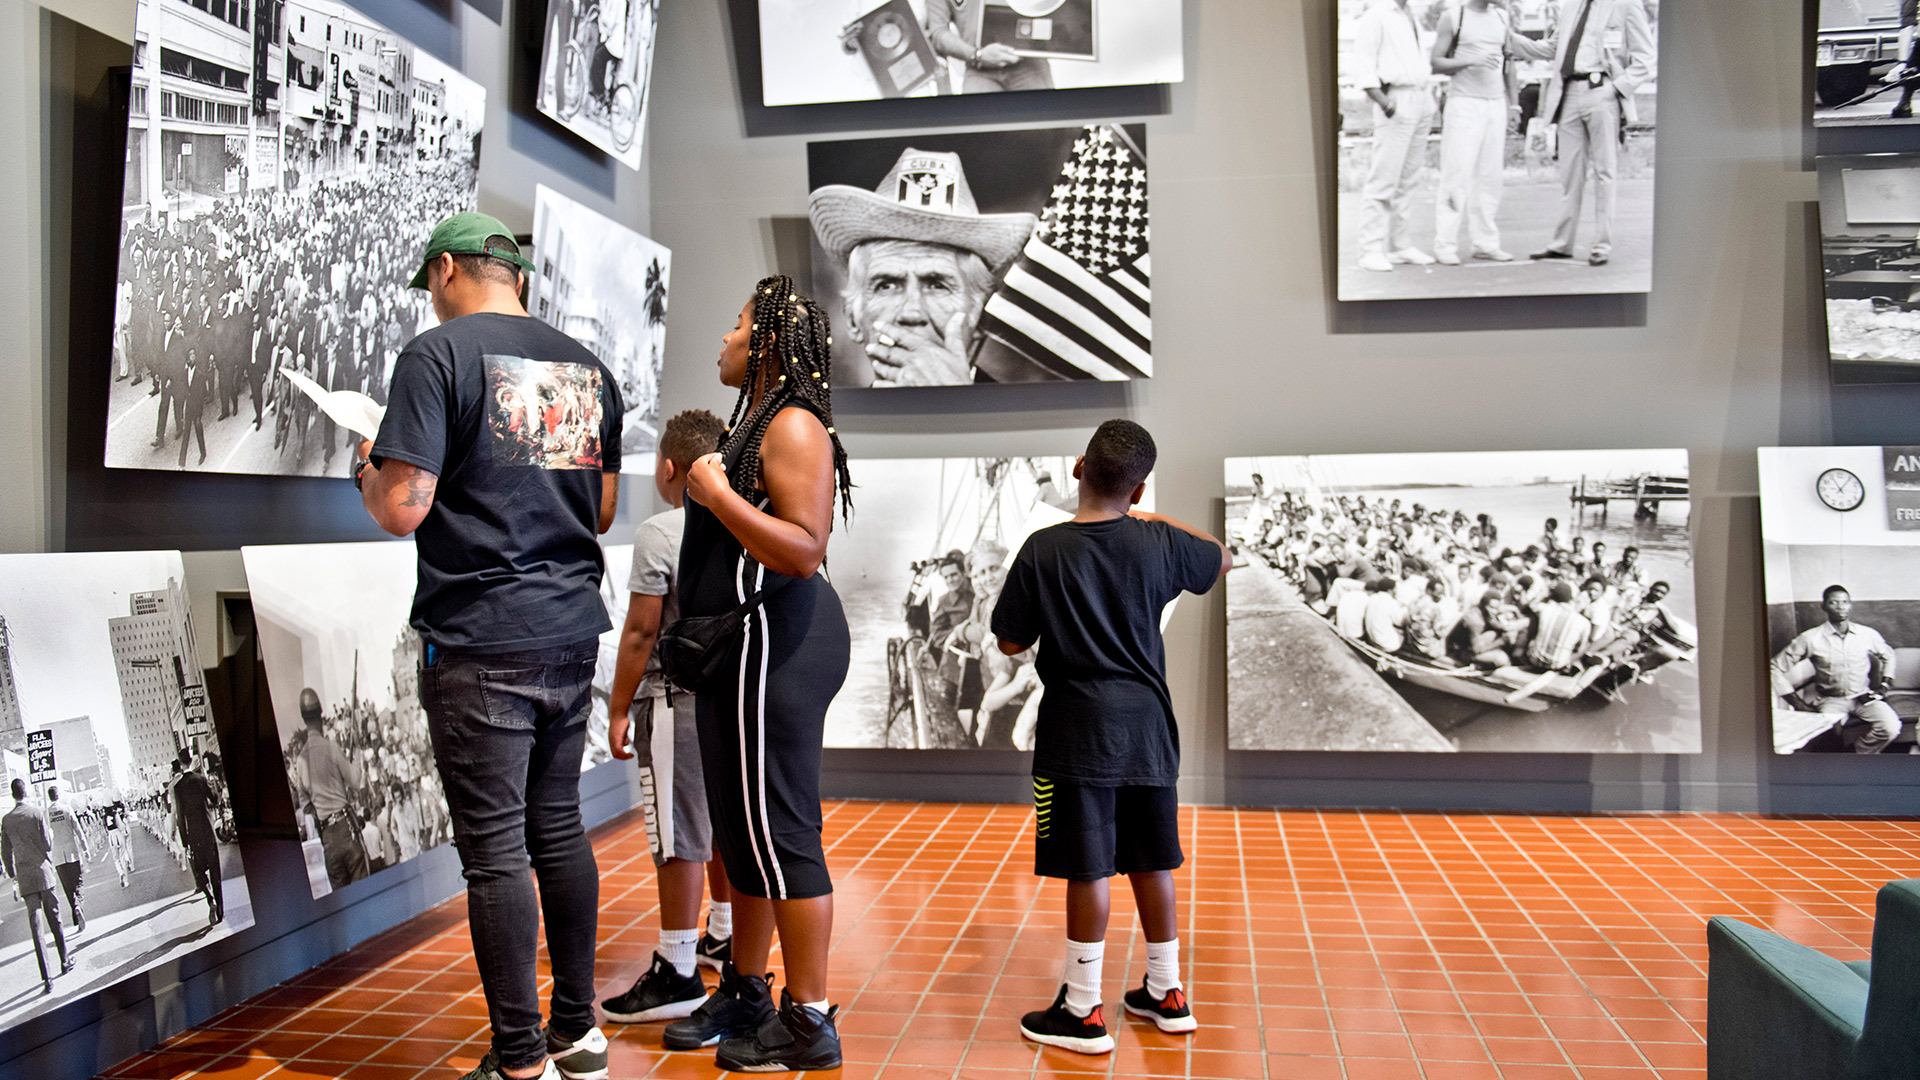 Free Family Fun Day: Picturing Community